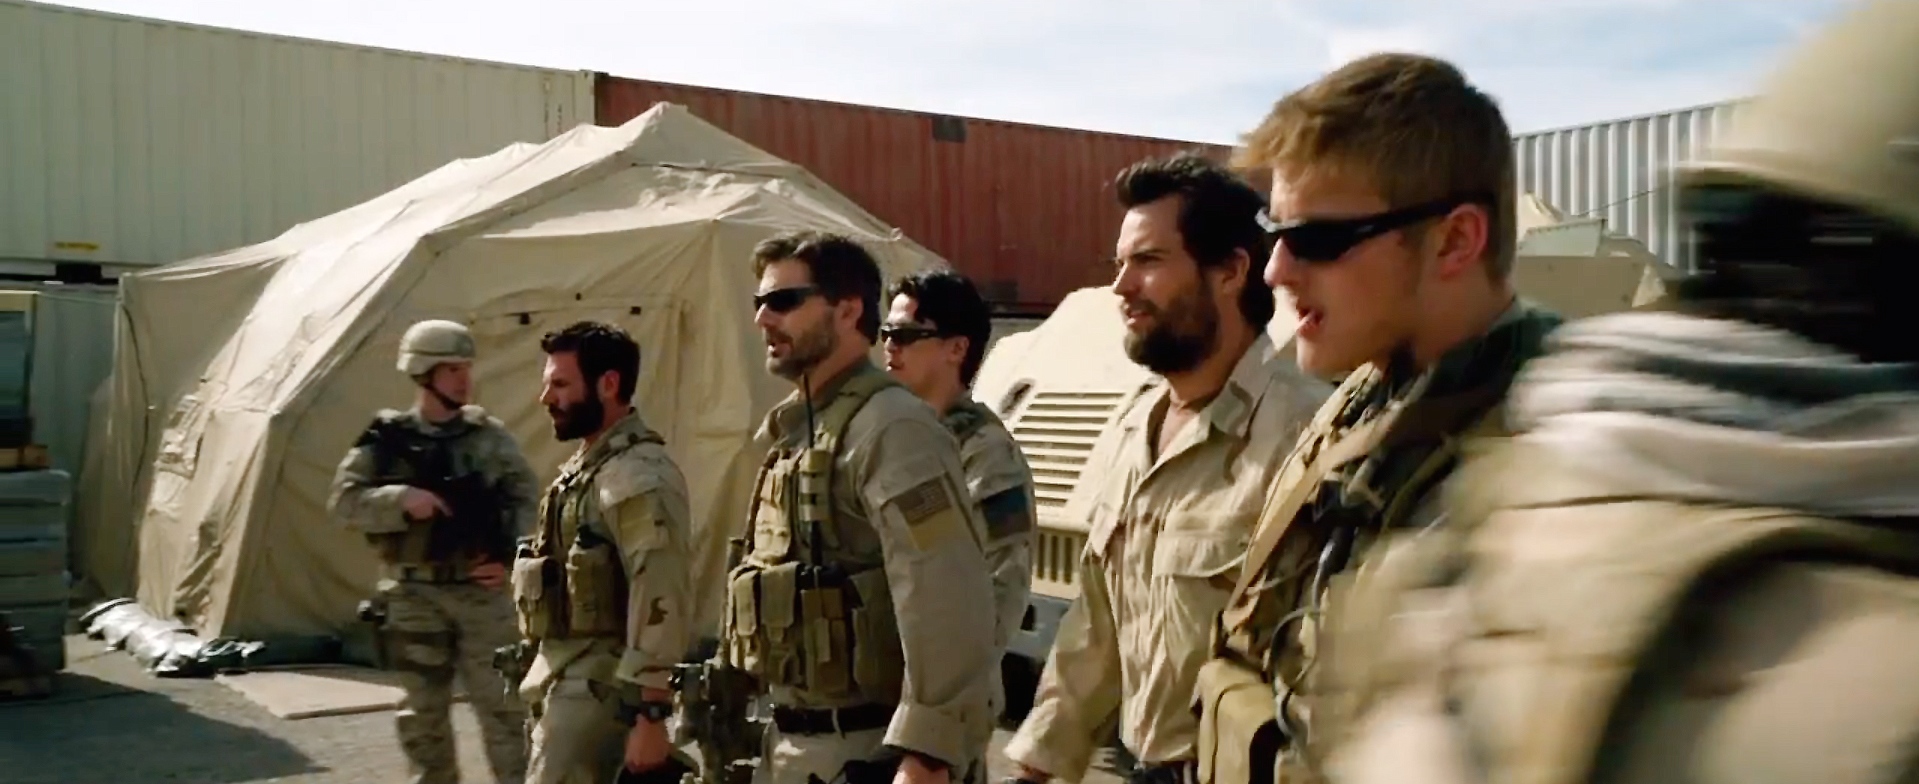 Still of Eric Bana, Rich Ting, Scott Elrod, and Alexander Ludwig in Lone Survivor (2013)